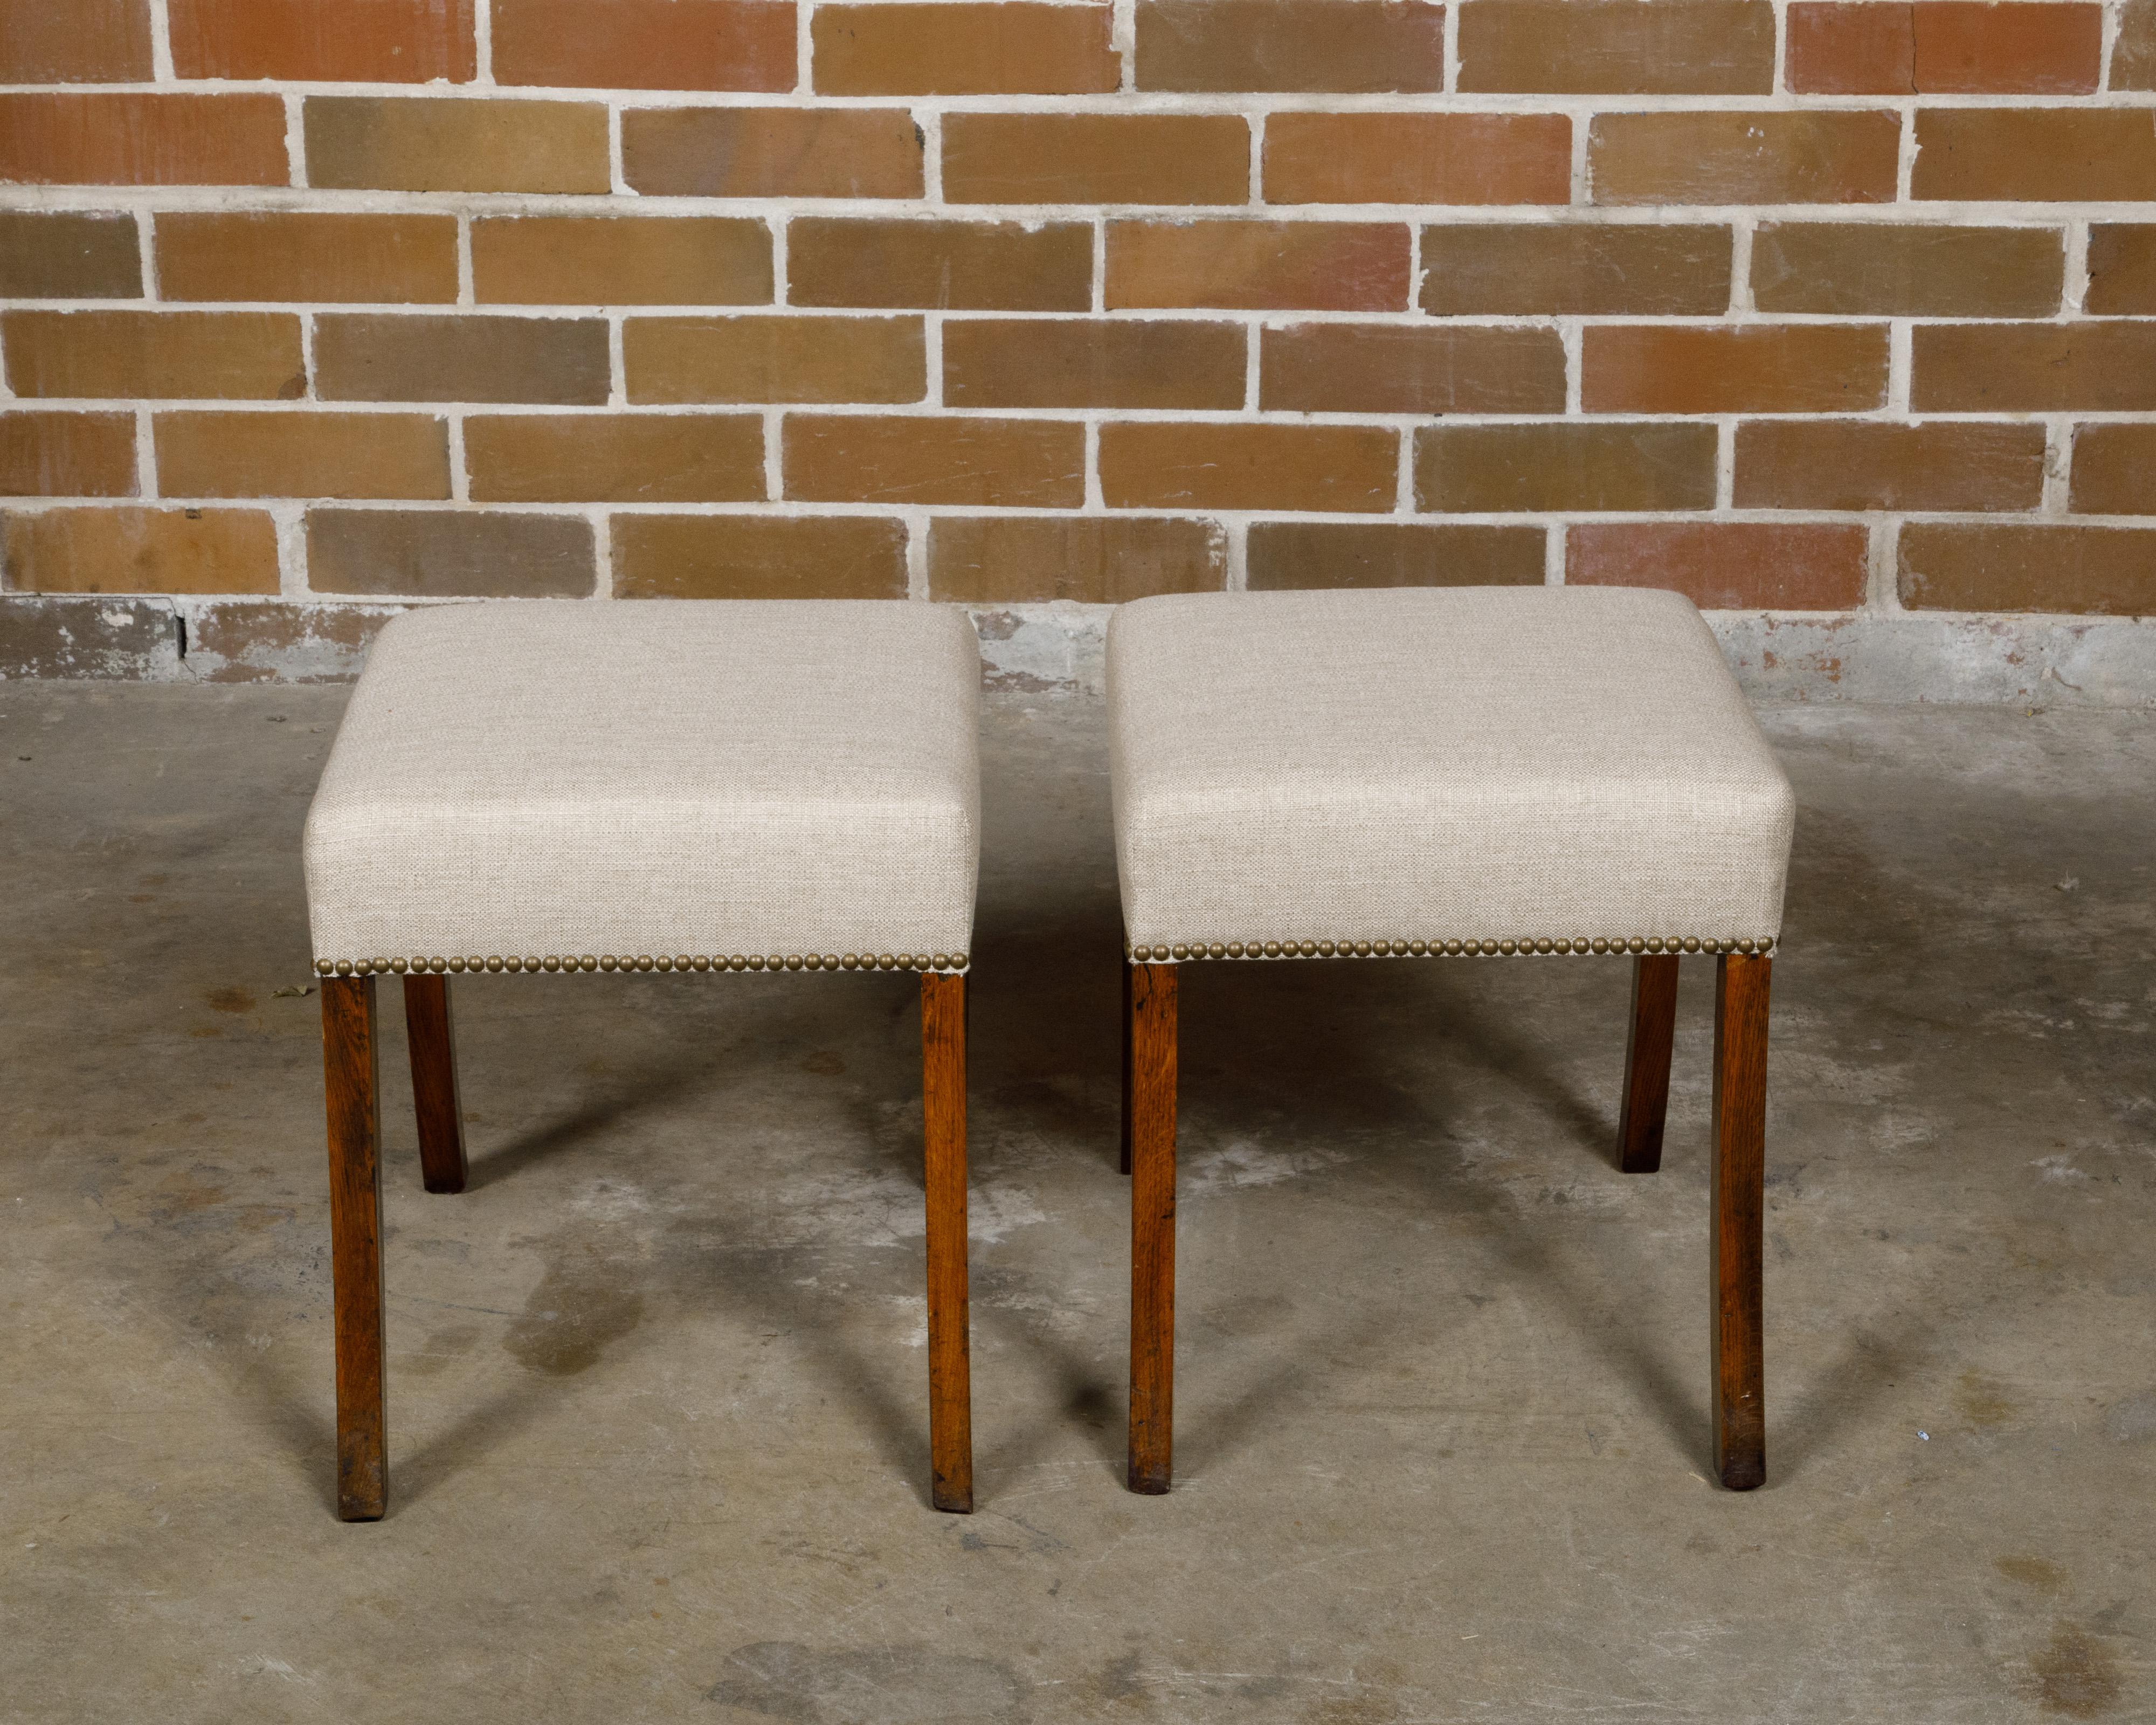 Pair of English 19th Century Oak Stools with Saber Legs and Custom Upholstery For Sale 2